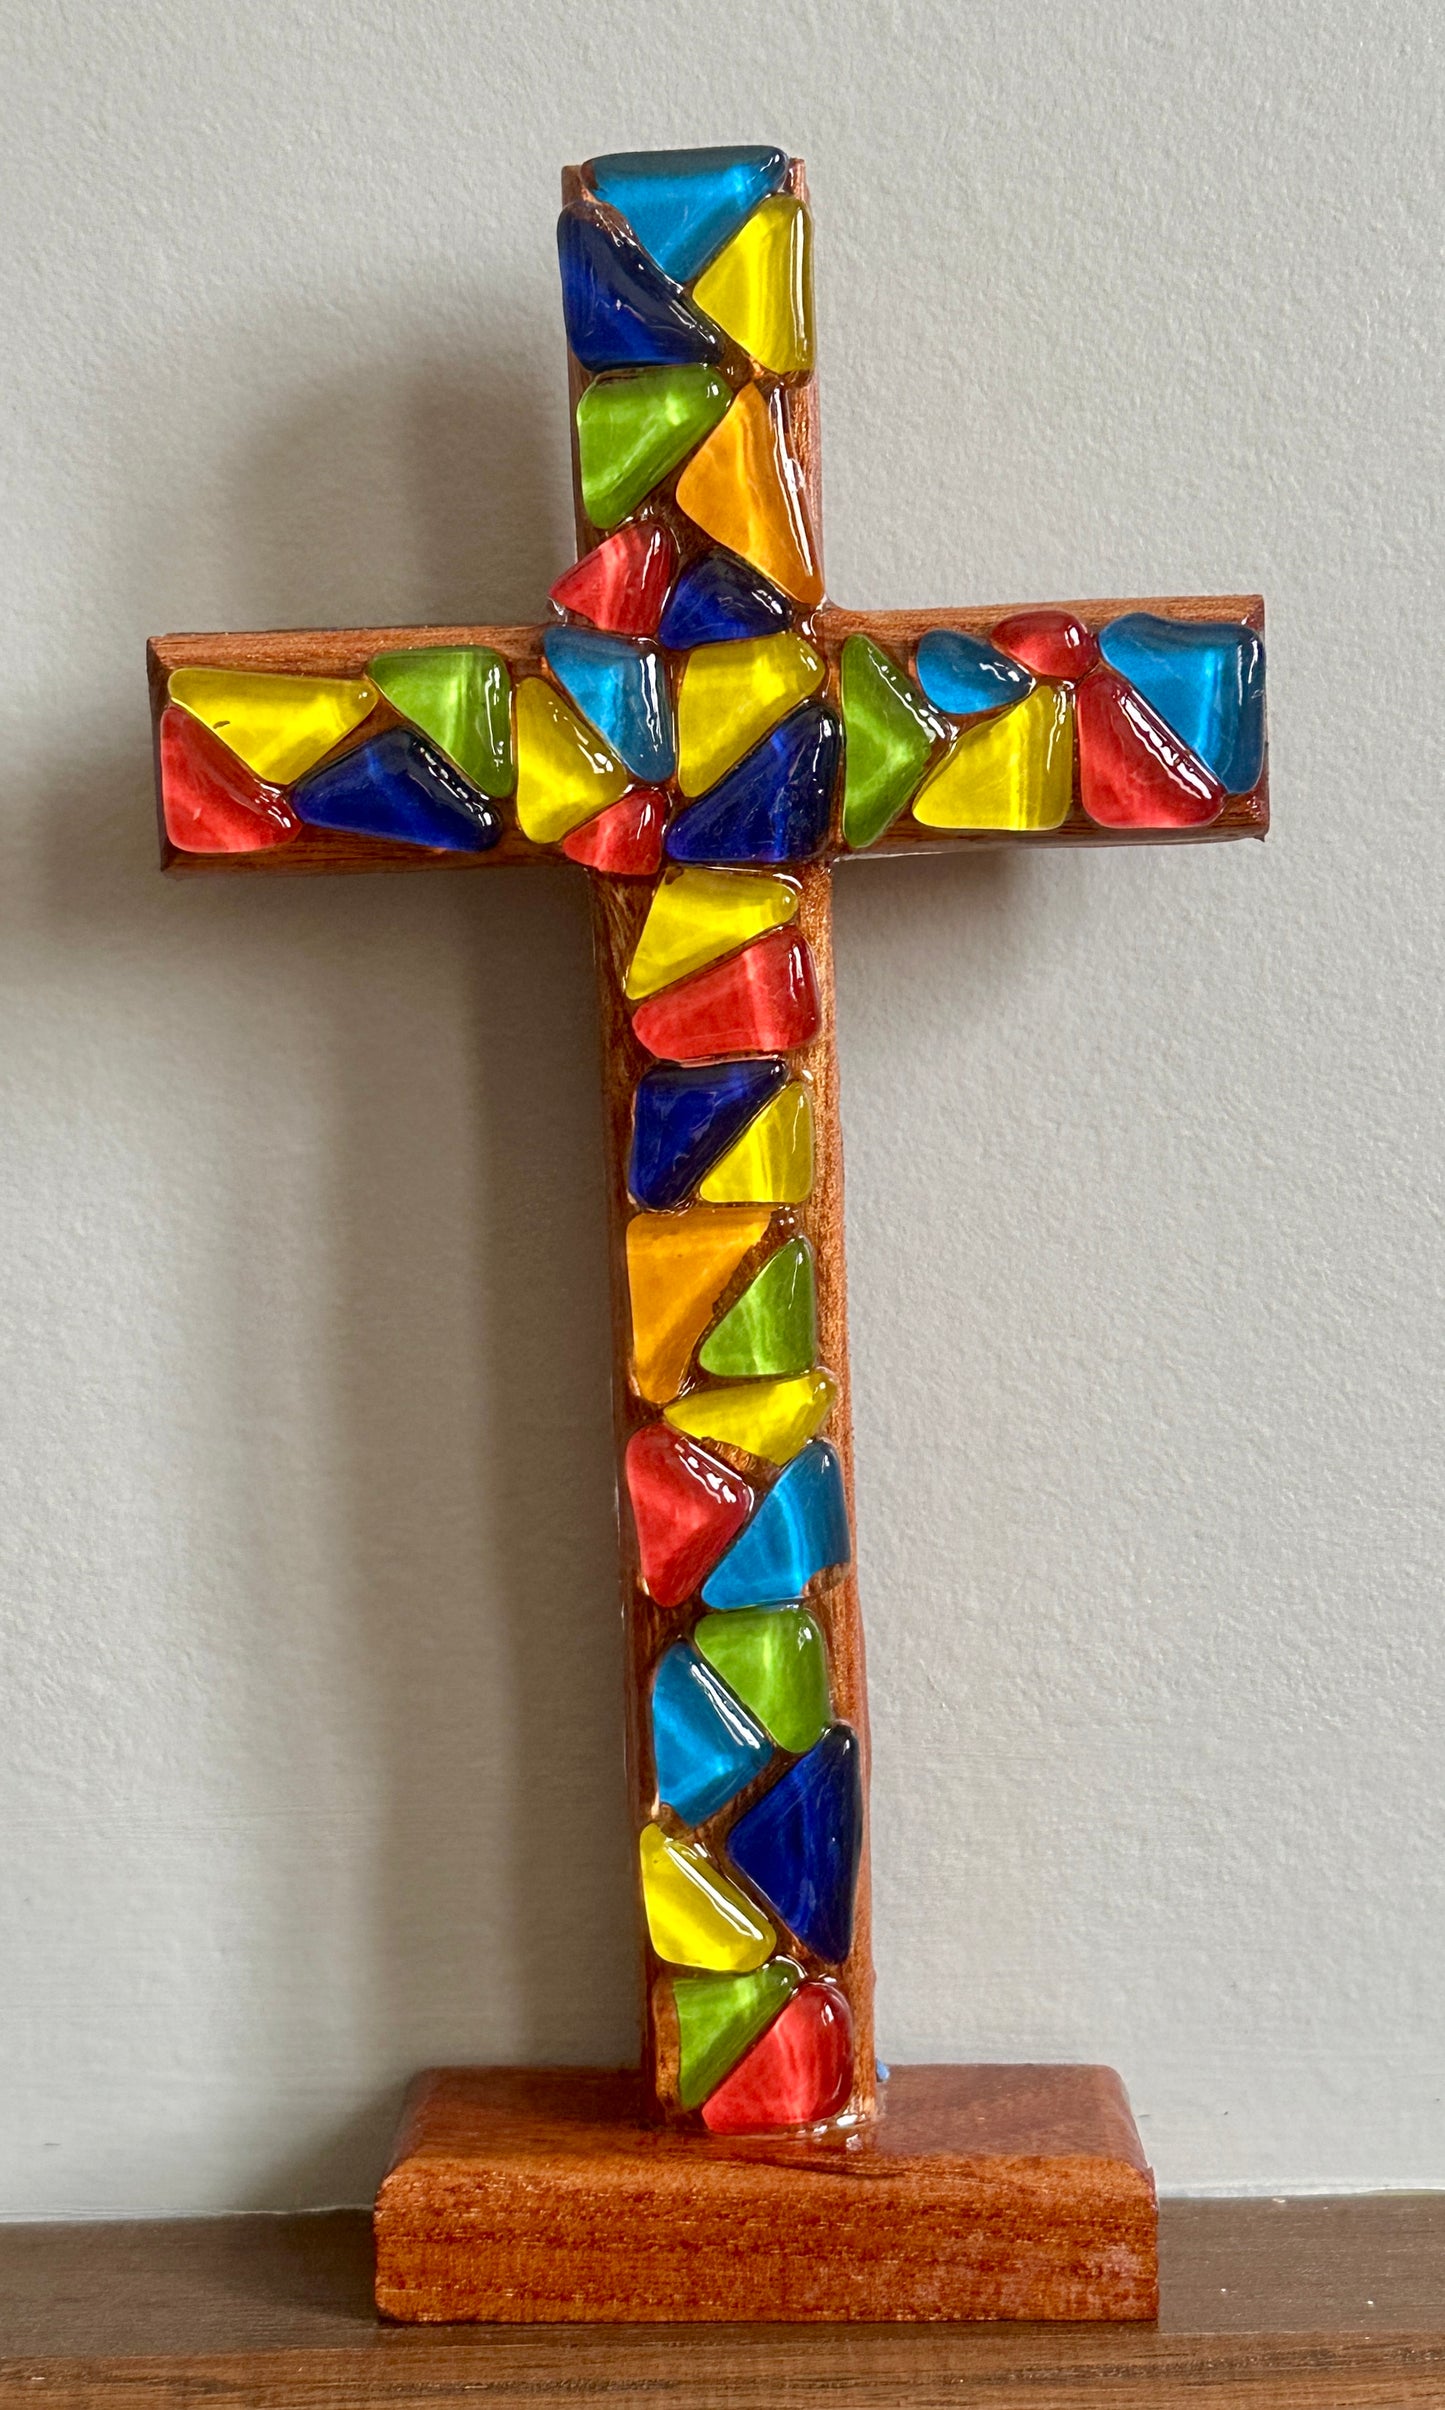 Resined Wooden Cross with Mosaic-Colored Rocks